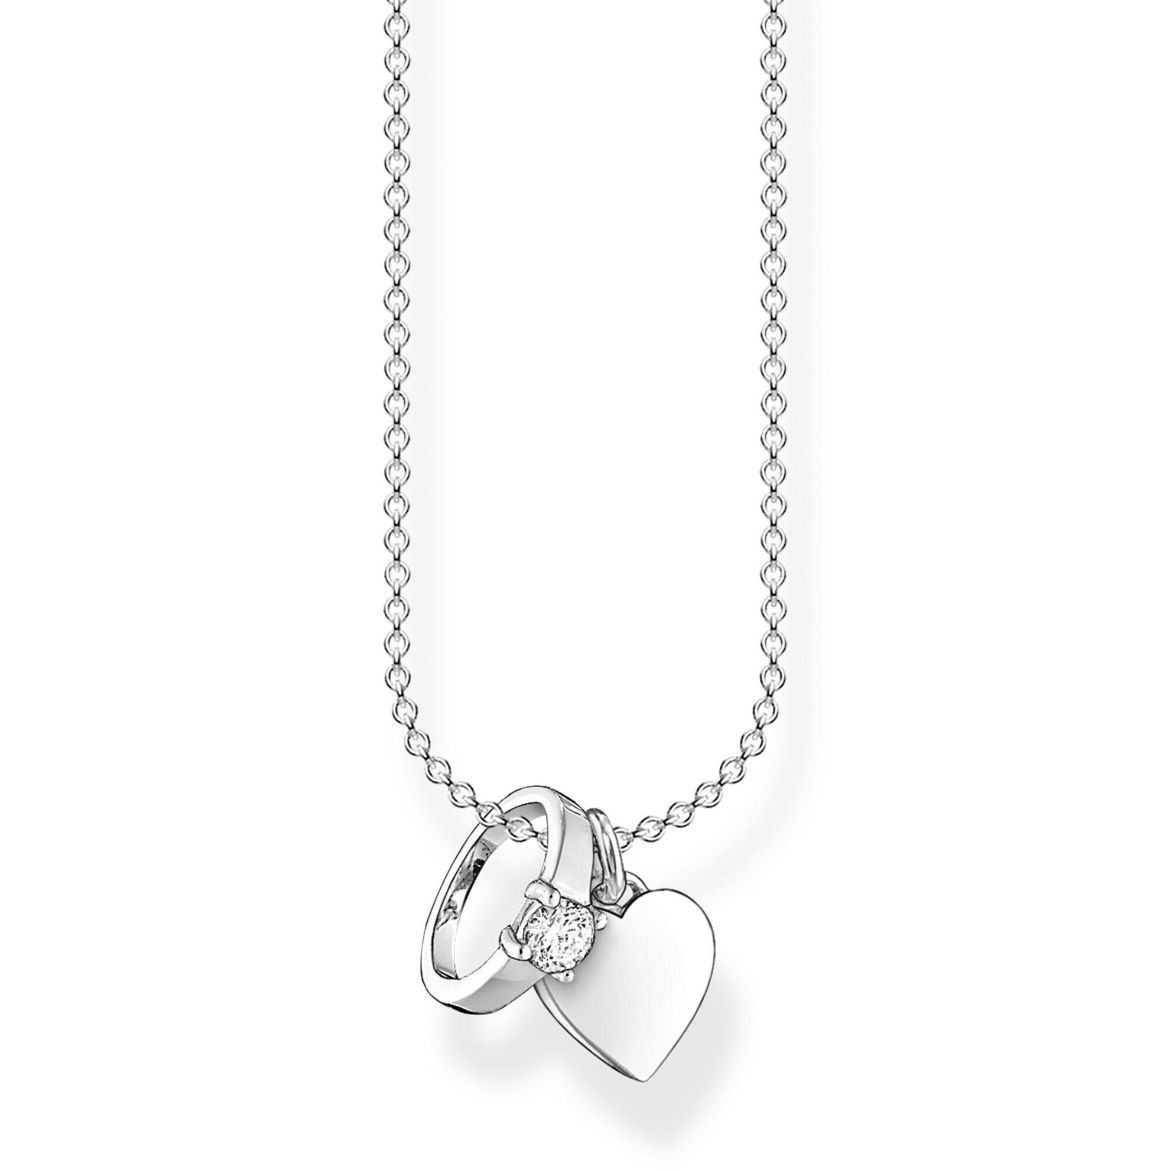 Picture of Ring and Heart Necklace